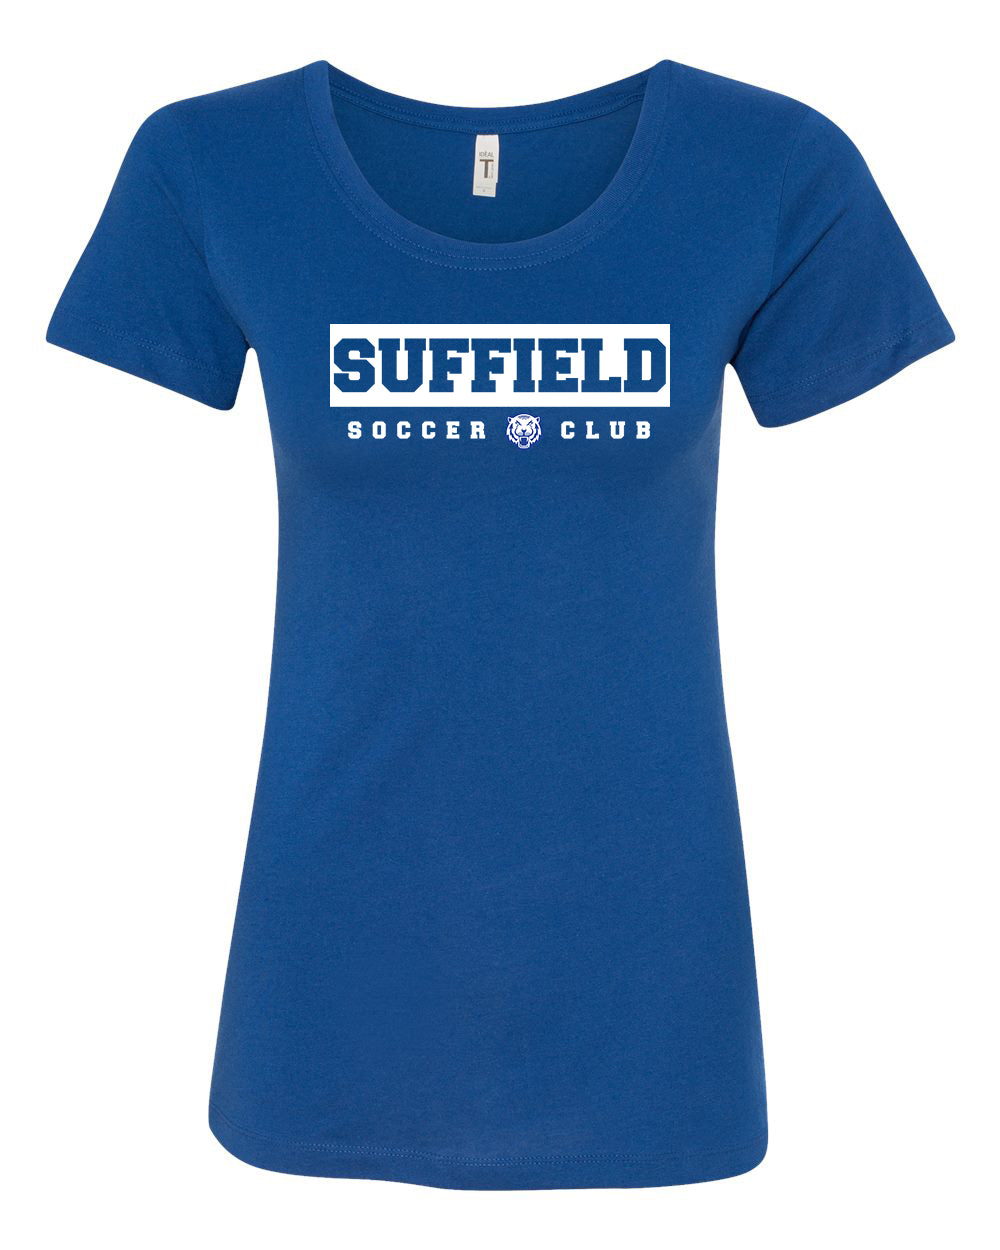 Suffield Soccer Club Ladies T-shirt "Rectangle" - 1510 (color options available)